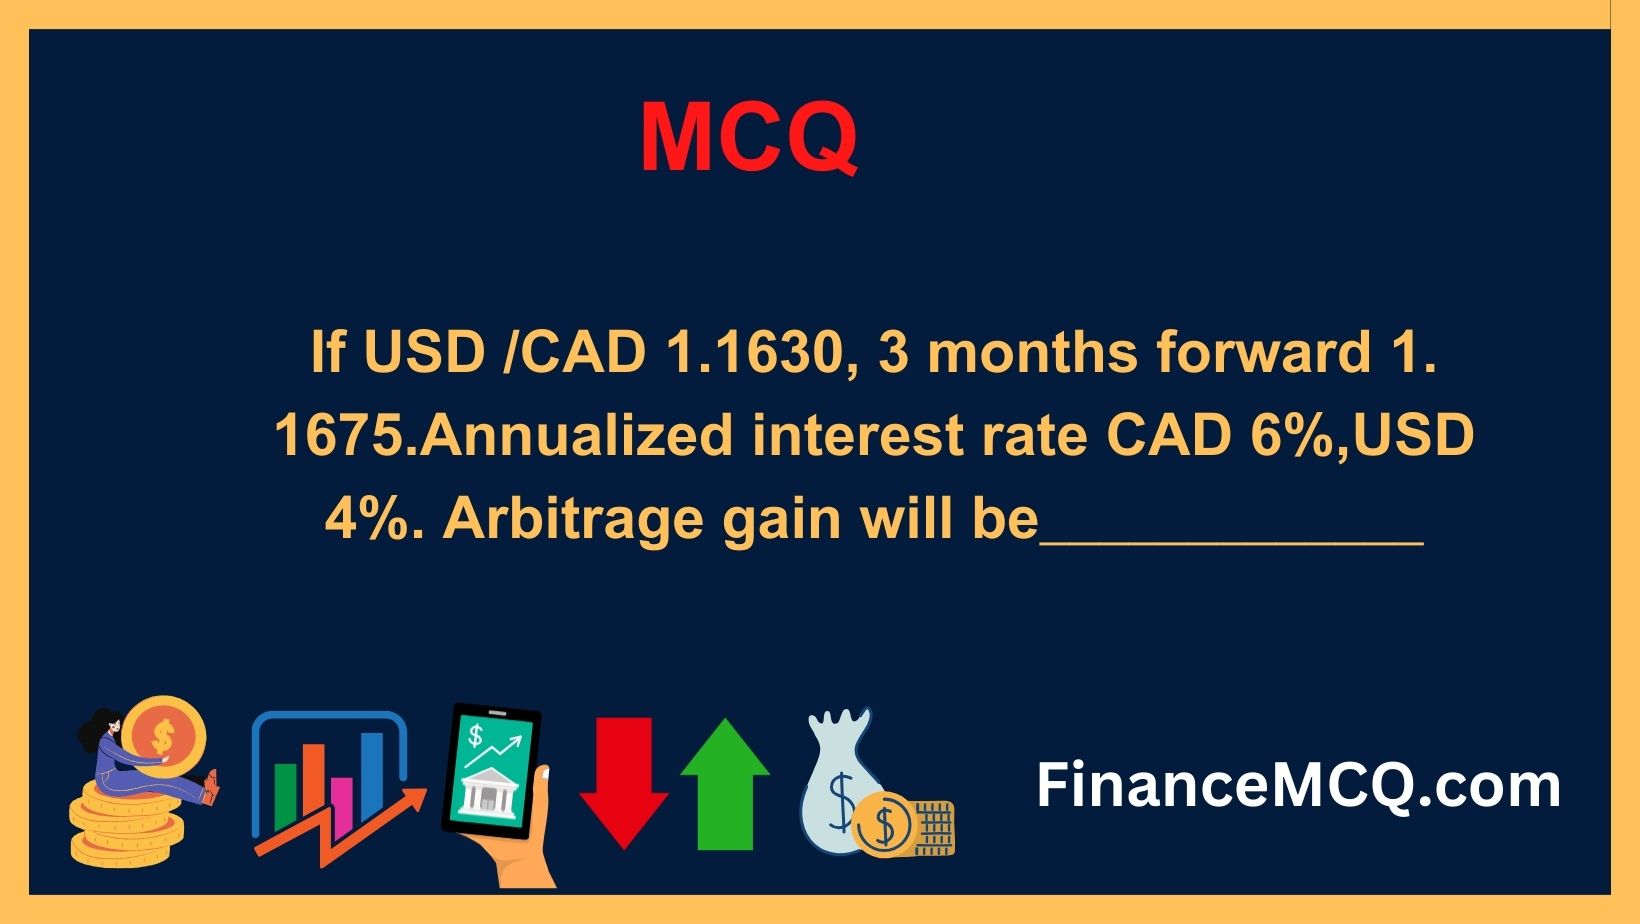 If USD CAD 1.1630, 3 months forward 1. 1675.Annualized interest rate CAD 6%,USD 4%. Arbitrage gain will be_____________